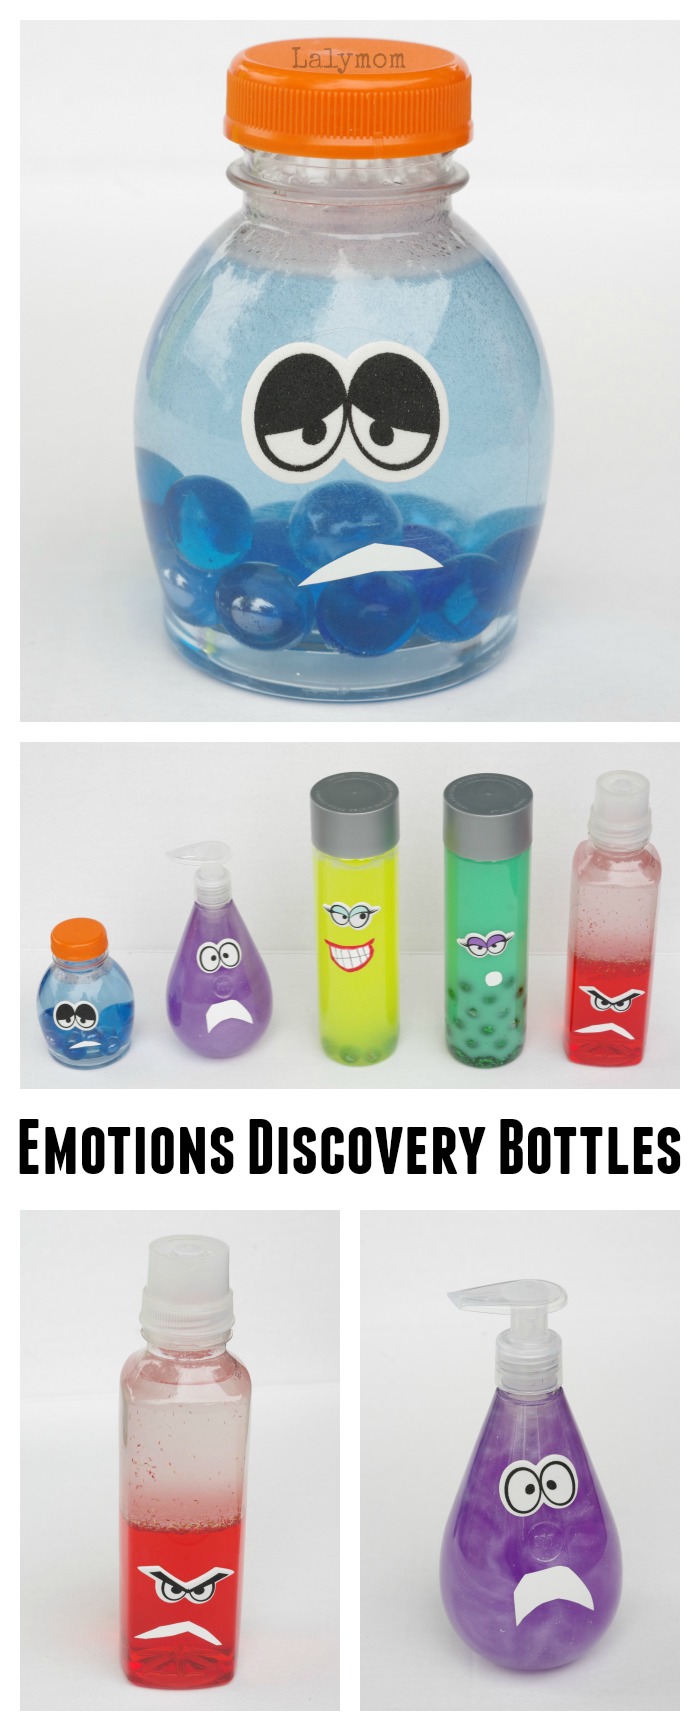 Emotions Discovery Bottles Inspired By Disney’s Inside Out